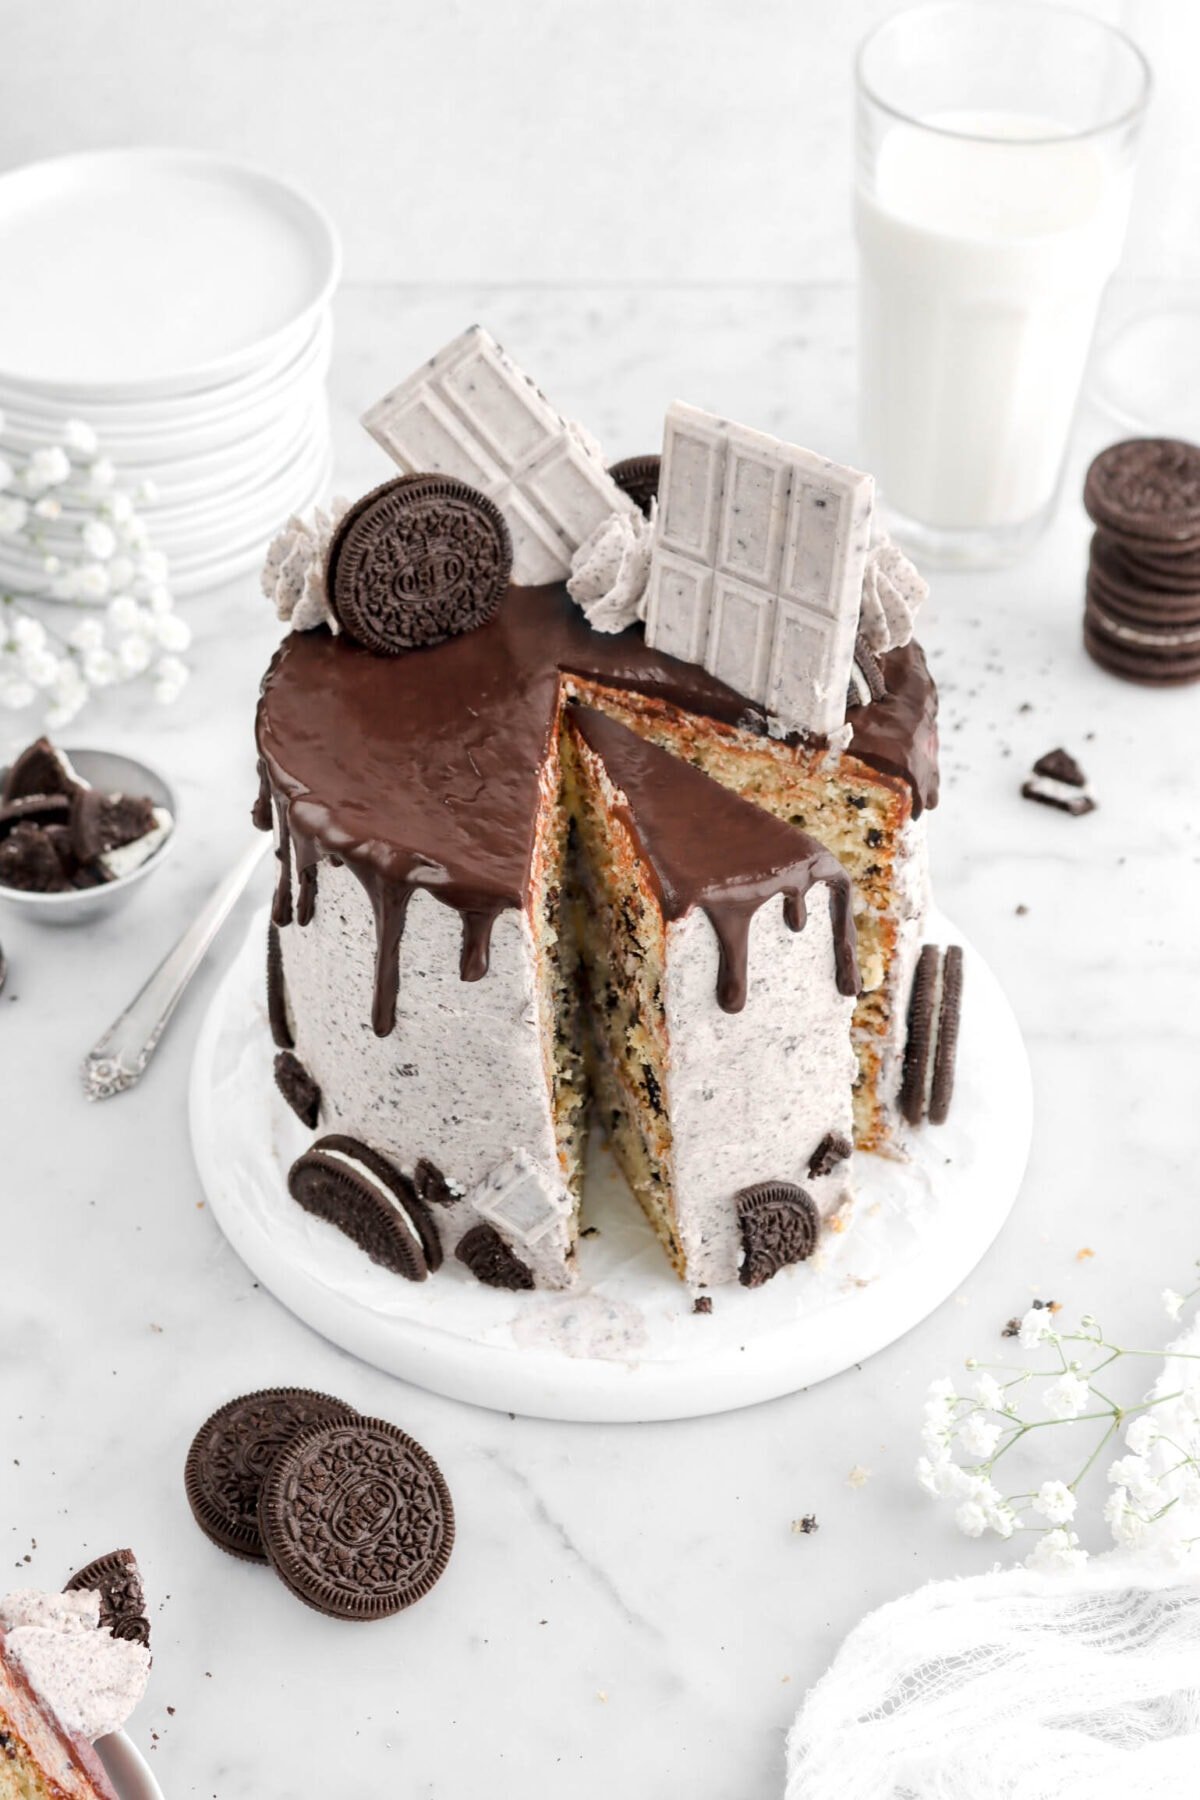 angled overhead shot of of oreo cake with slice cut into cake, with chocolate drips, cookies and cream candy bars, oreos, and piped frosting on top of cake with flowers and oreos around, a glass of milk, and stack of plates behind.